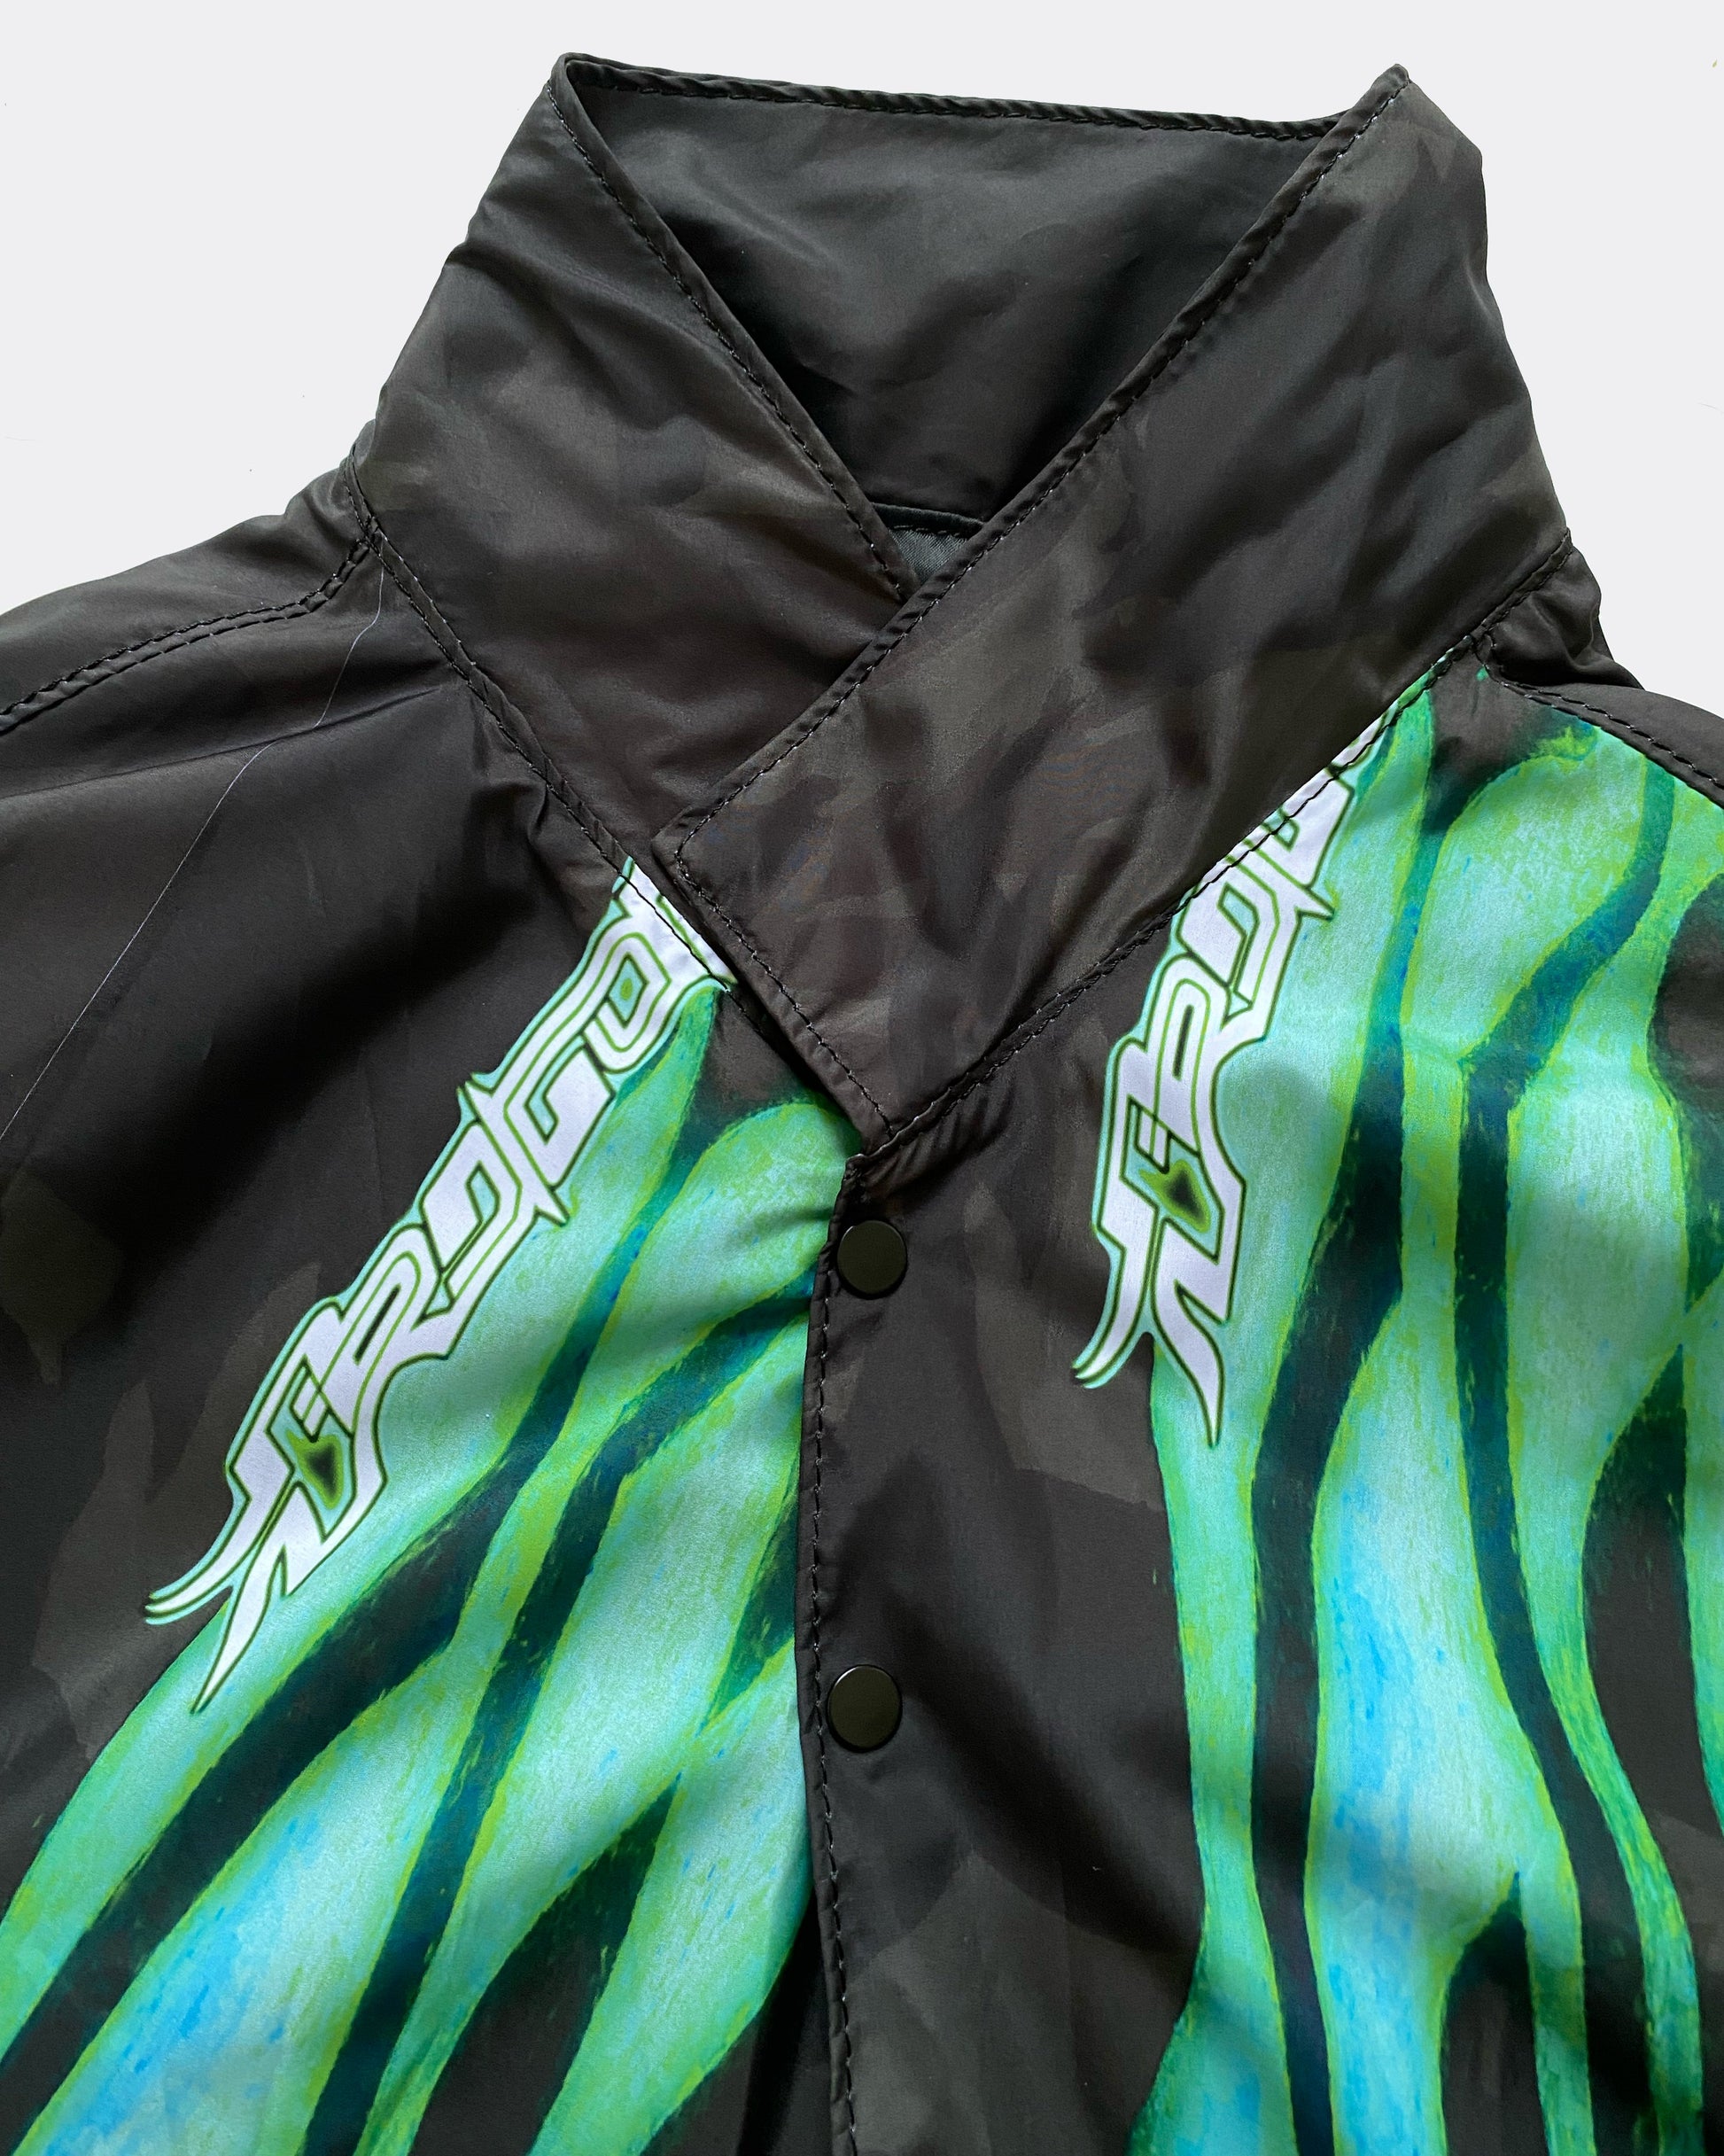 DRAGON JACKET - FRSR - PREAPOCLO